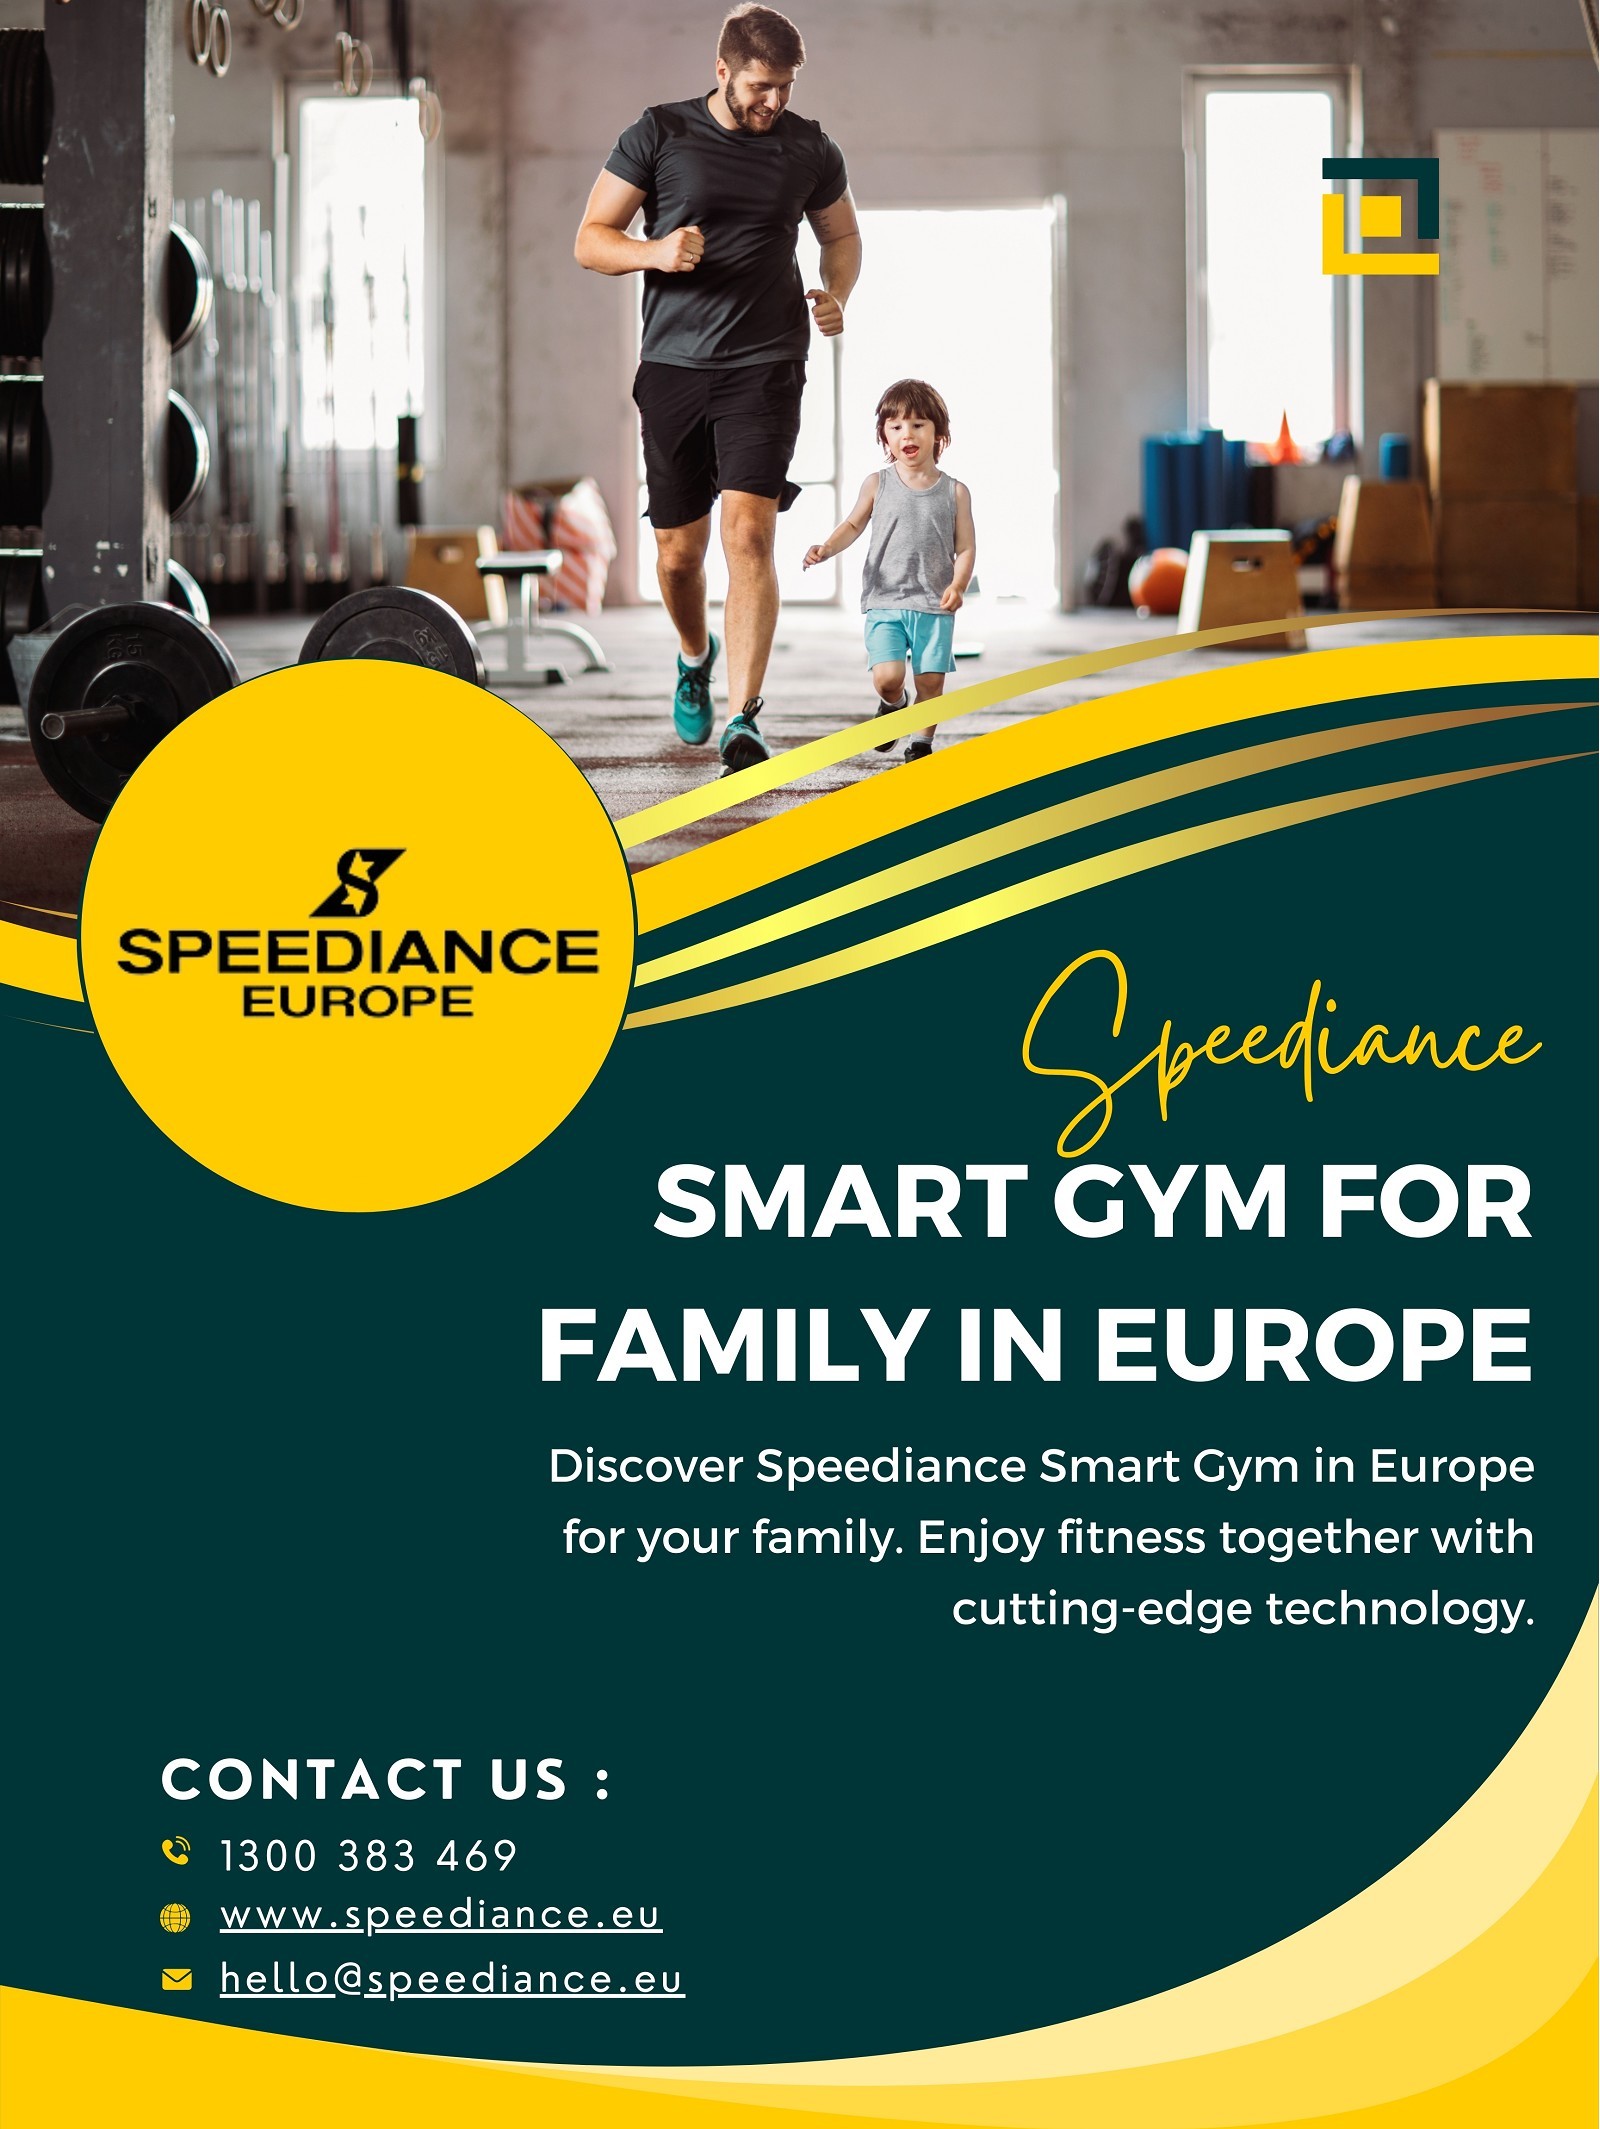 Speediance Smart Gym for Family in Europe